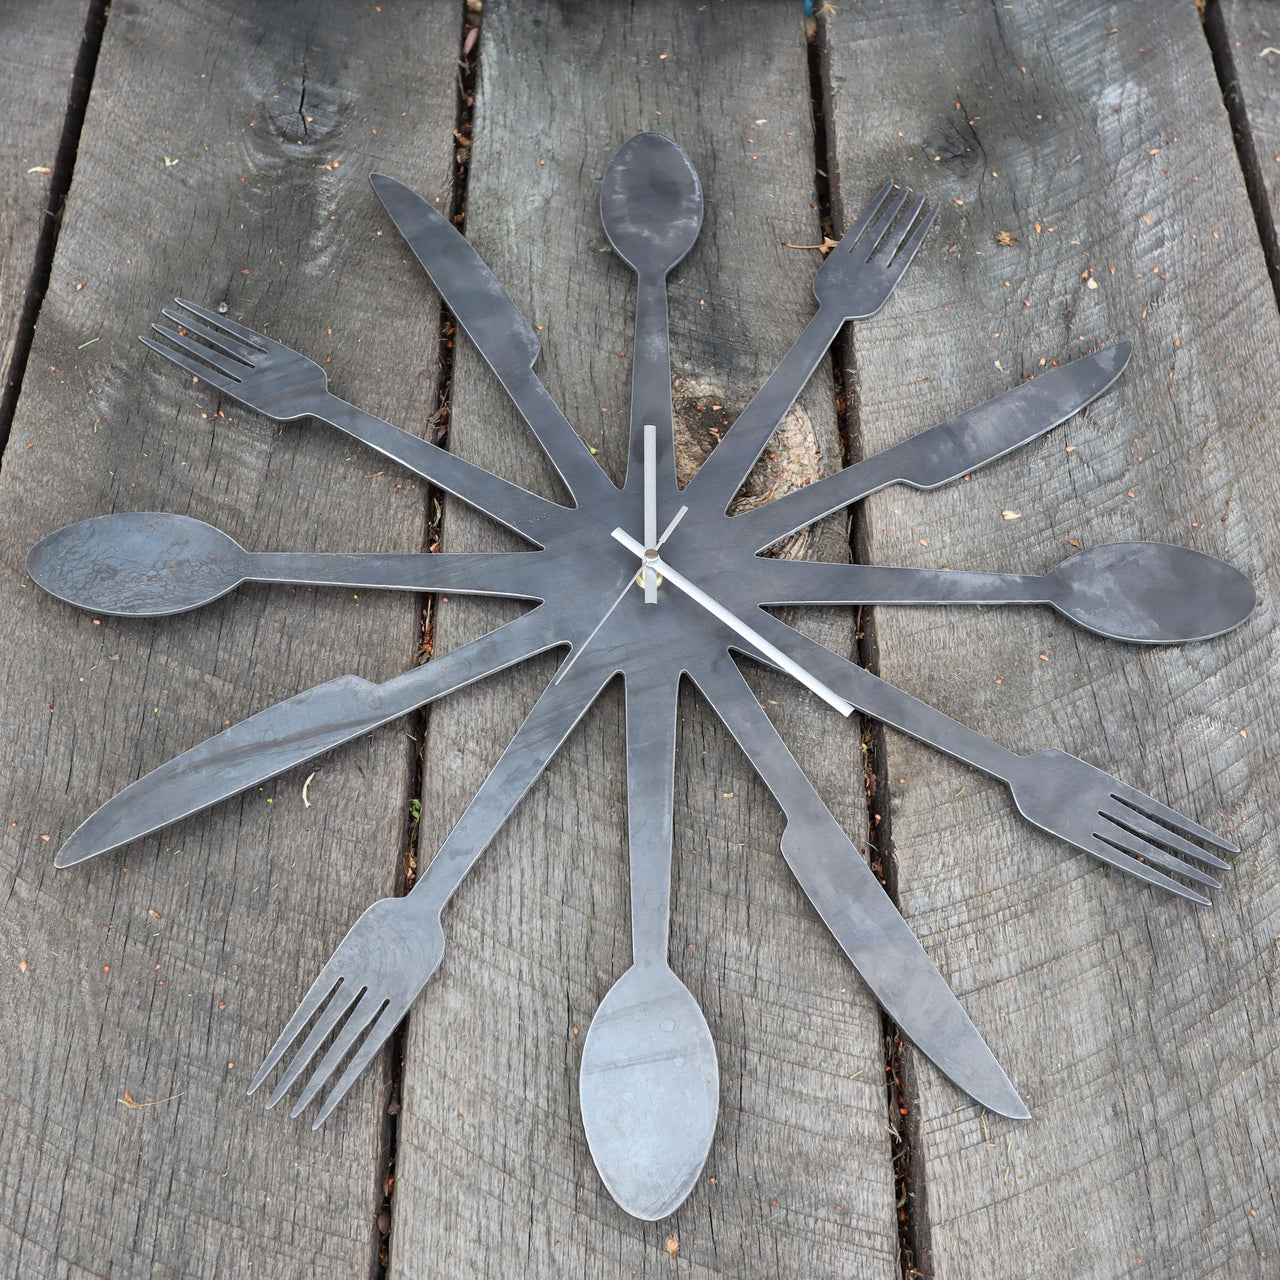 Foodie Metal Clock - Rustic Home Cutlery Wall Art - 24" Diameter with Spoons, Forks, and Knives